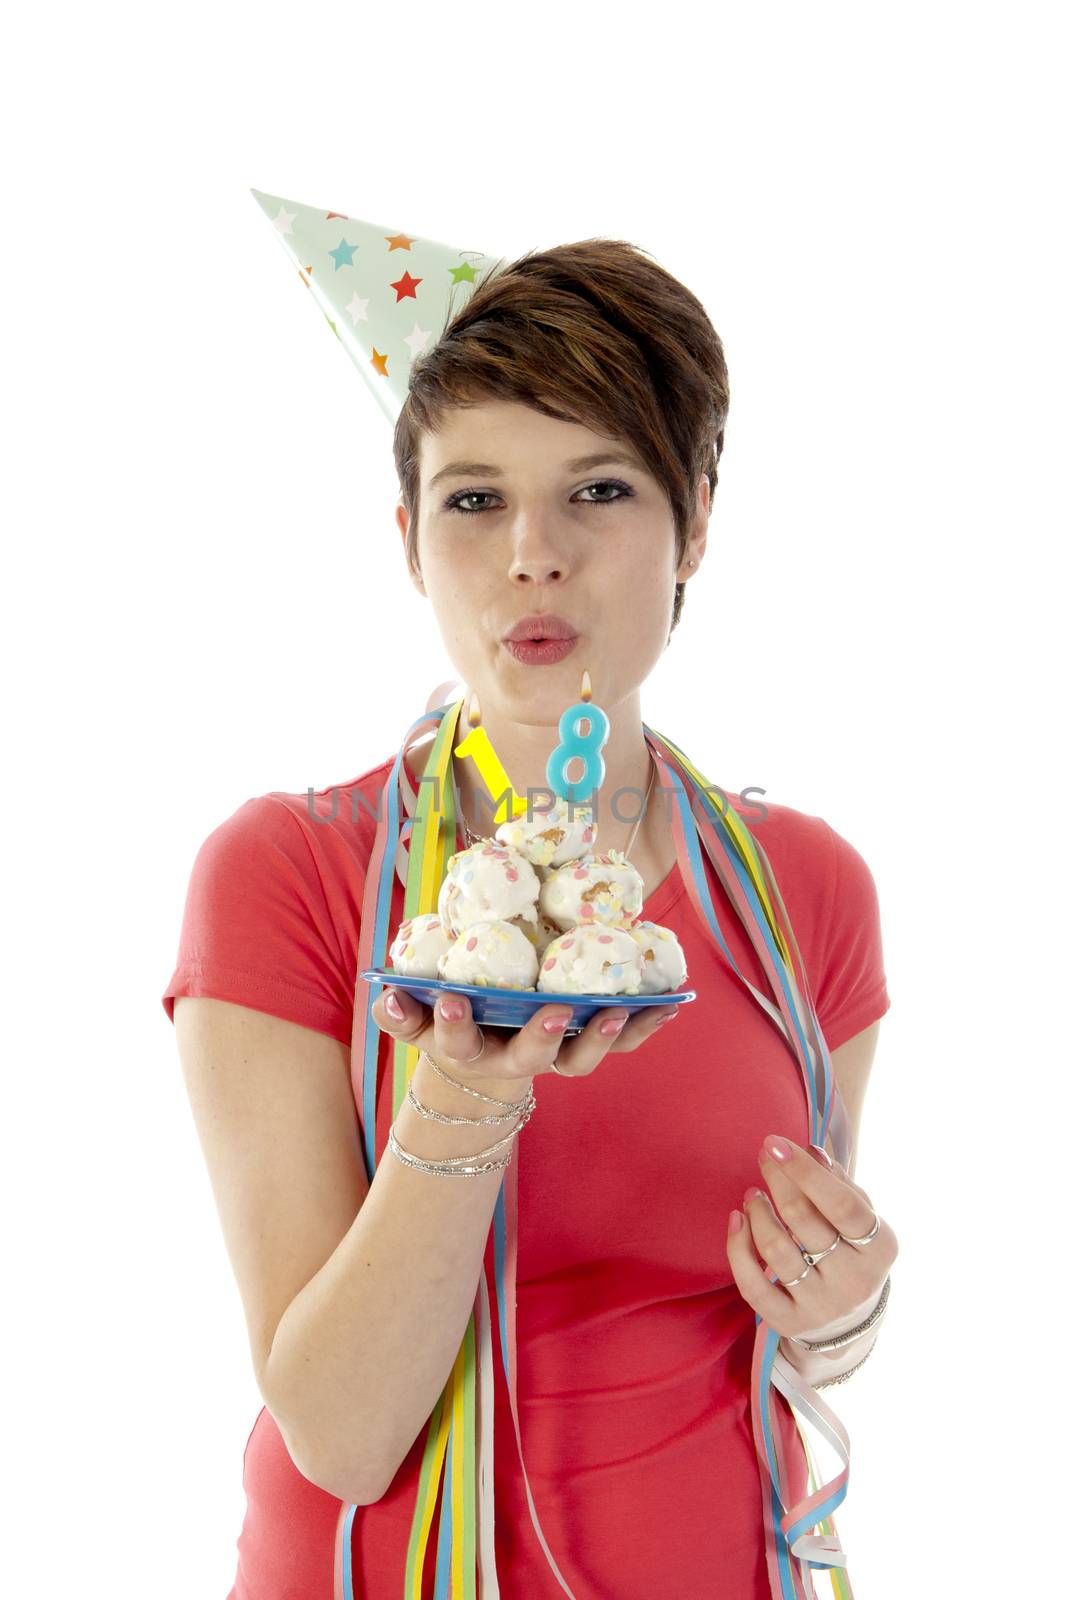 a birthday girl on her 18th birthday, holding a cake with a candle on a white background